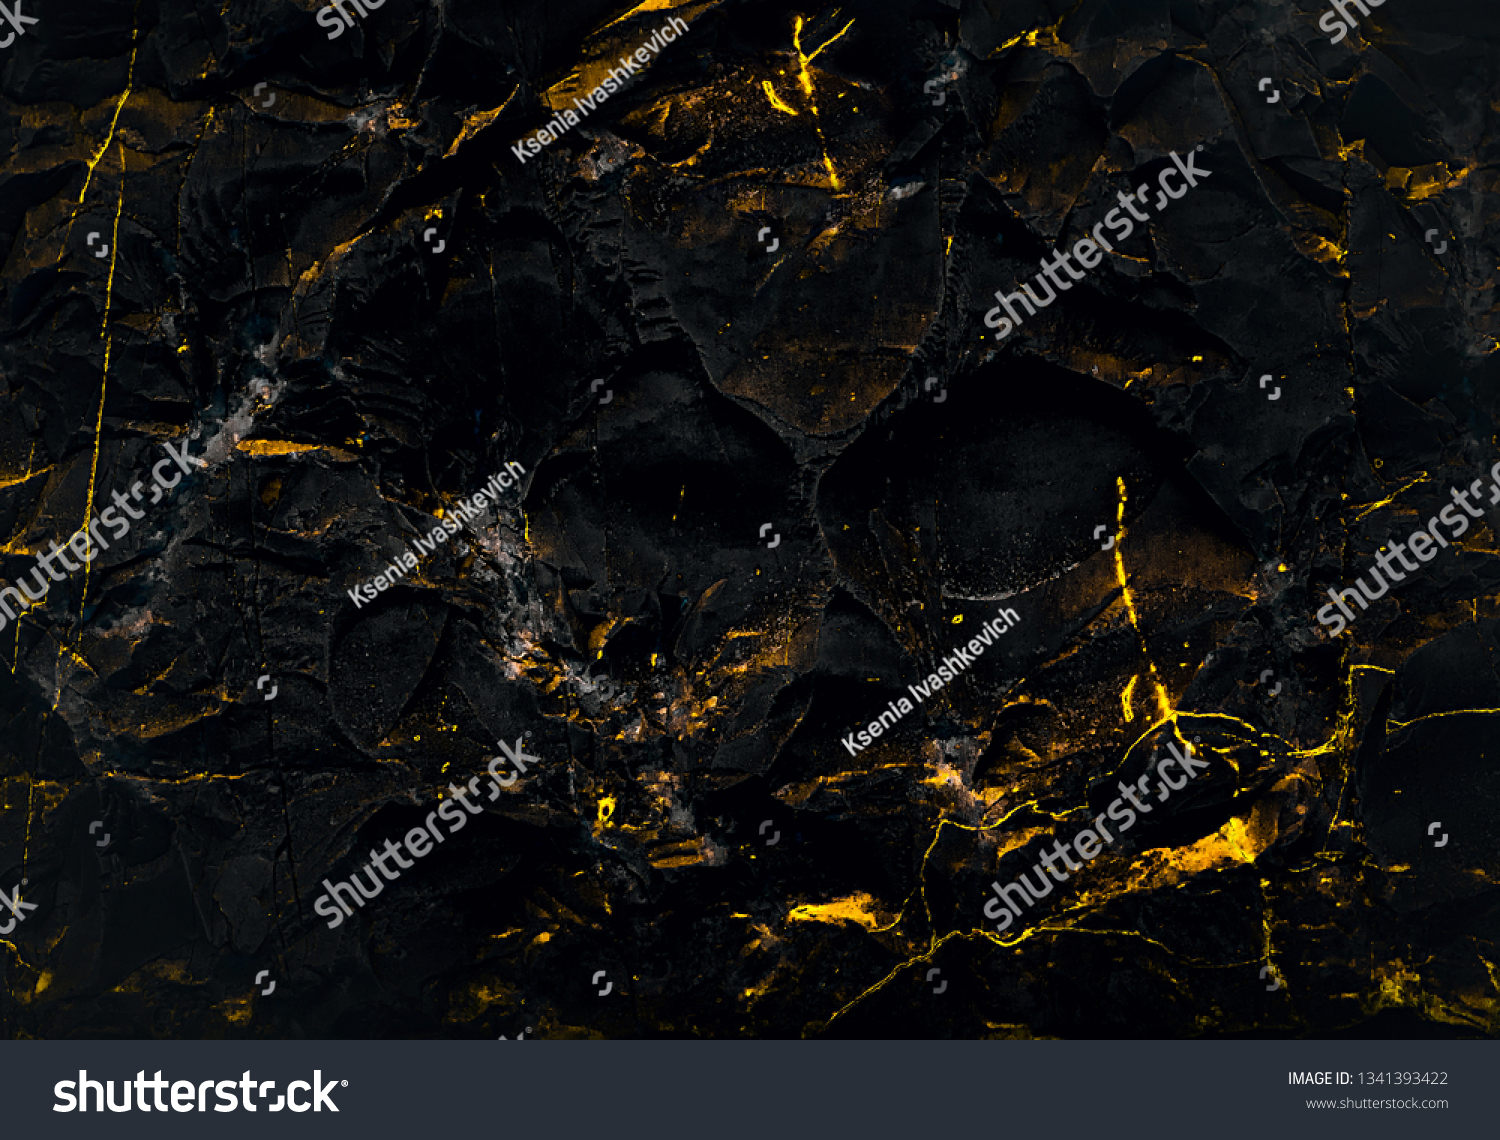 Dark Backgrounds. Wall abstraction. Lava. Paint spots. Rock surface with cracks. Rock backgrounds. Abstract texture. Rock texture. Stone background. Stone texture. Structure.  #1341393422